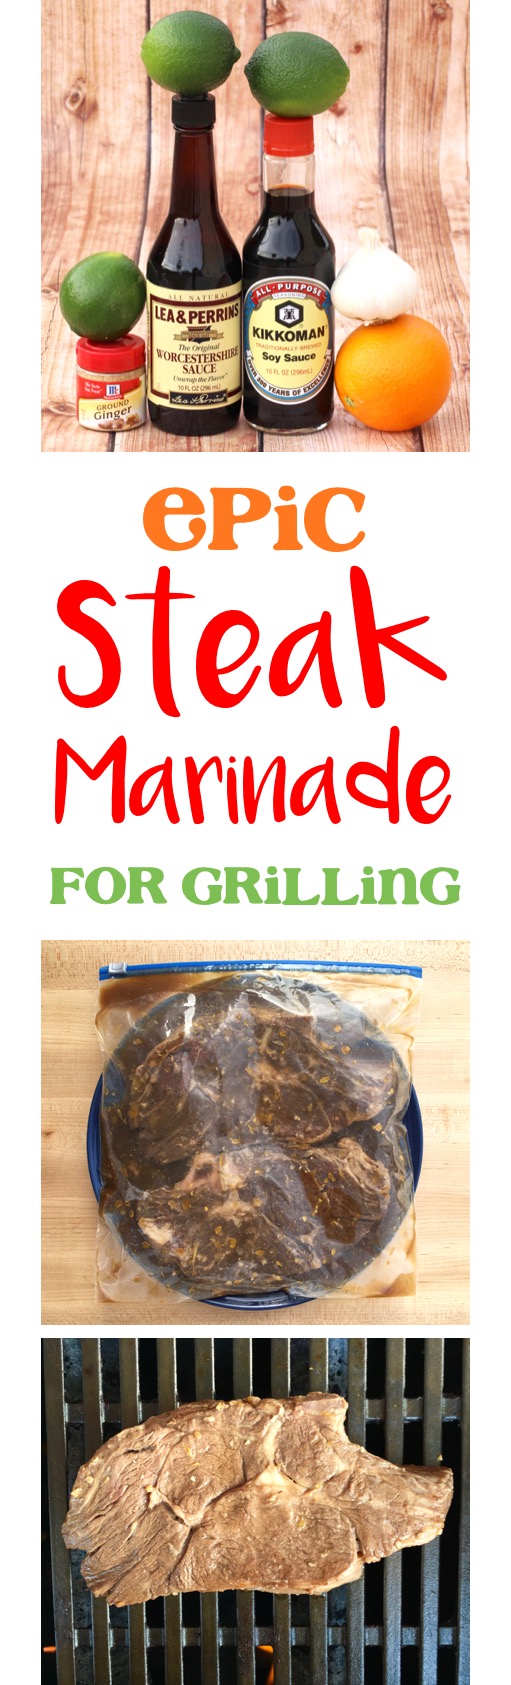 Steak Marinade for Grilling Recipe from TheFrugalGirls.com